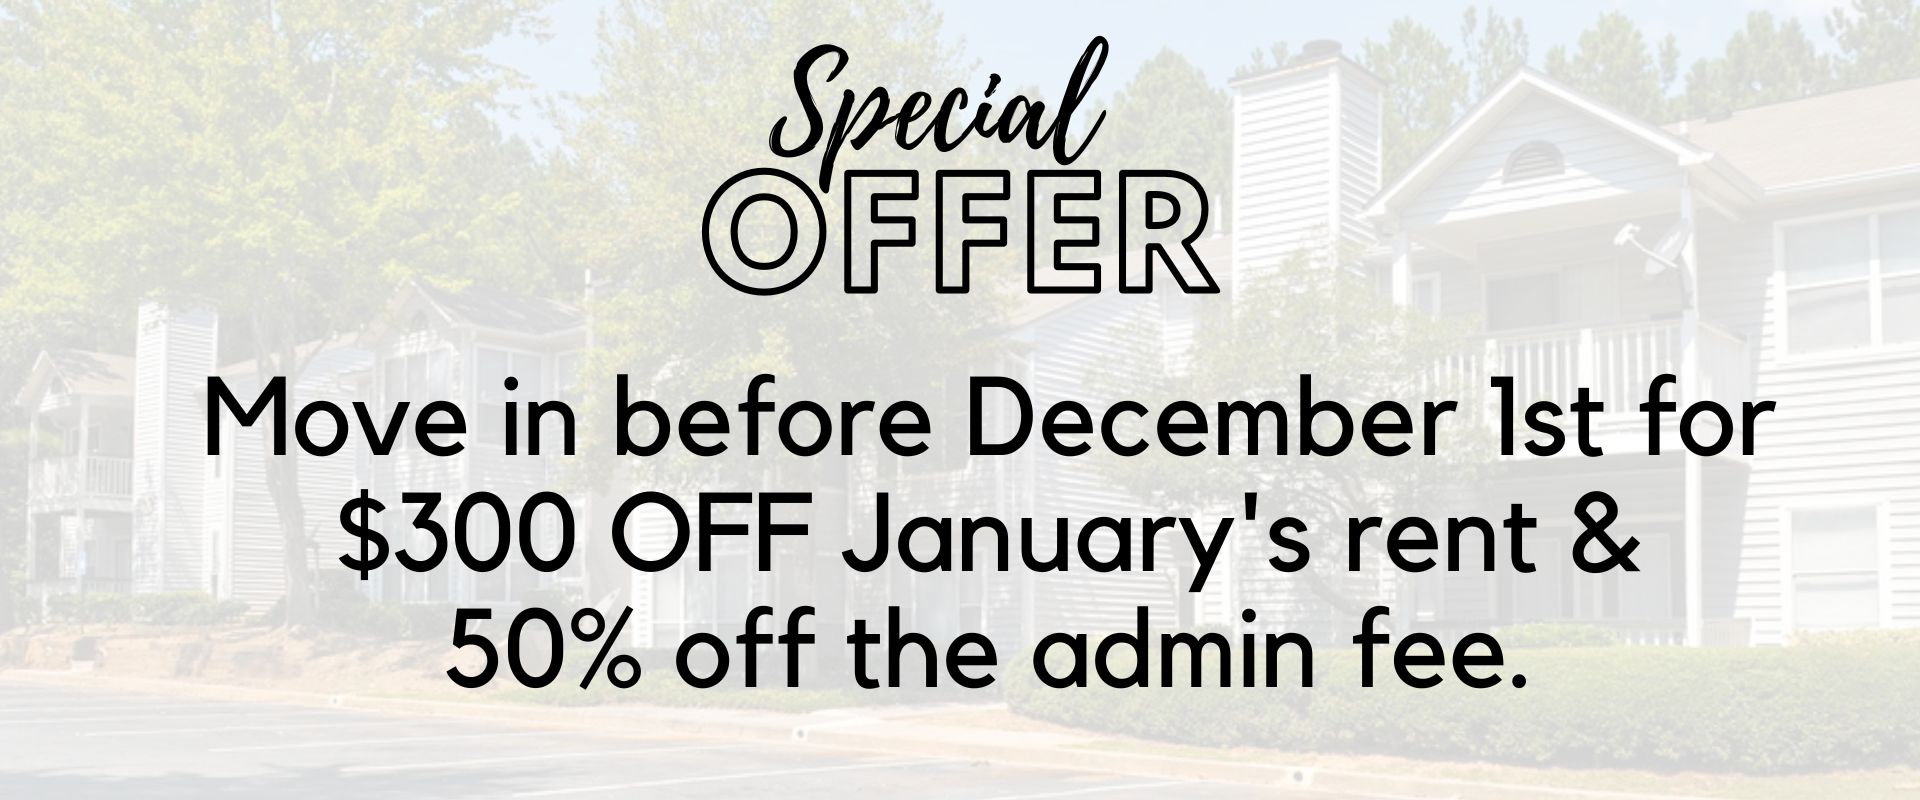 Special Offer - Move in before December 1st for $300 OFF January's rent & 50% off the admin fee.